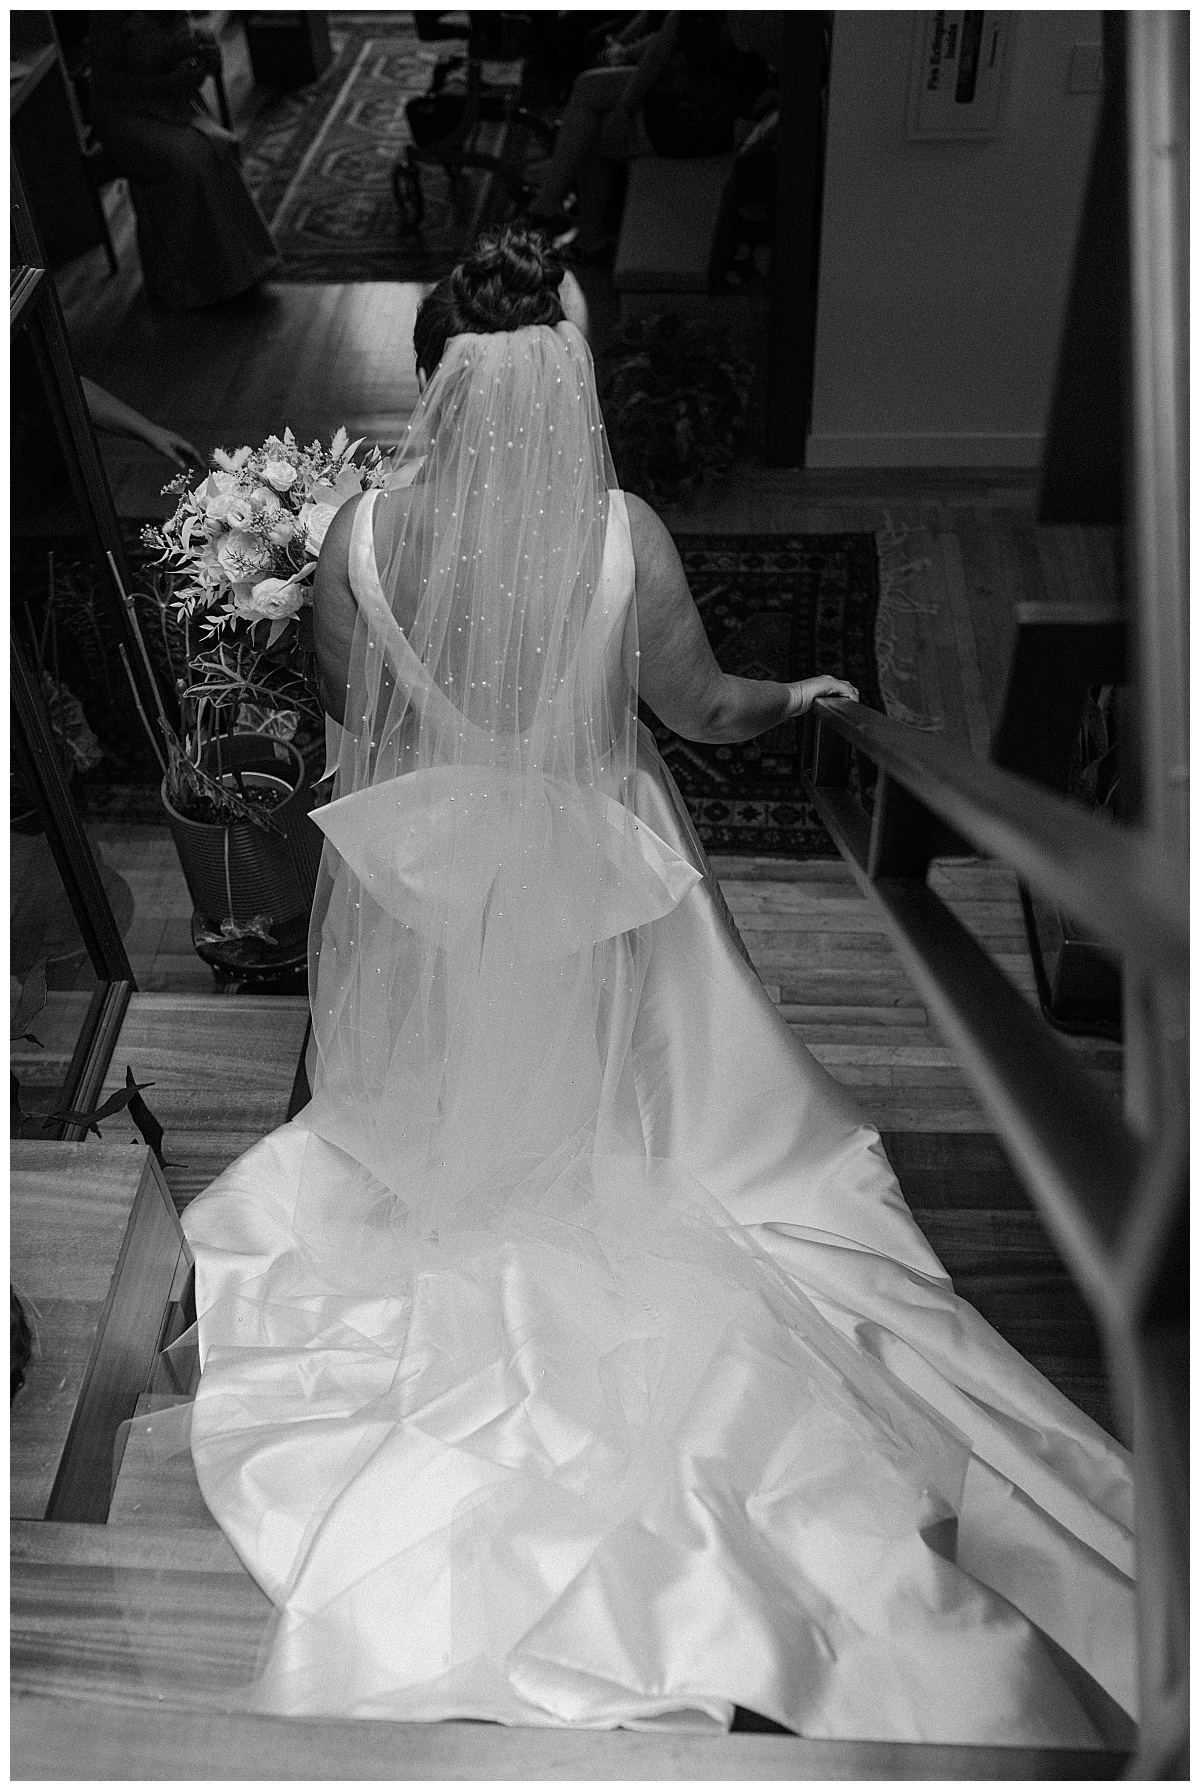 woman walks down stairs in gown holding bouquet by Chicago photographer